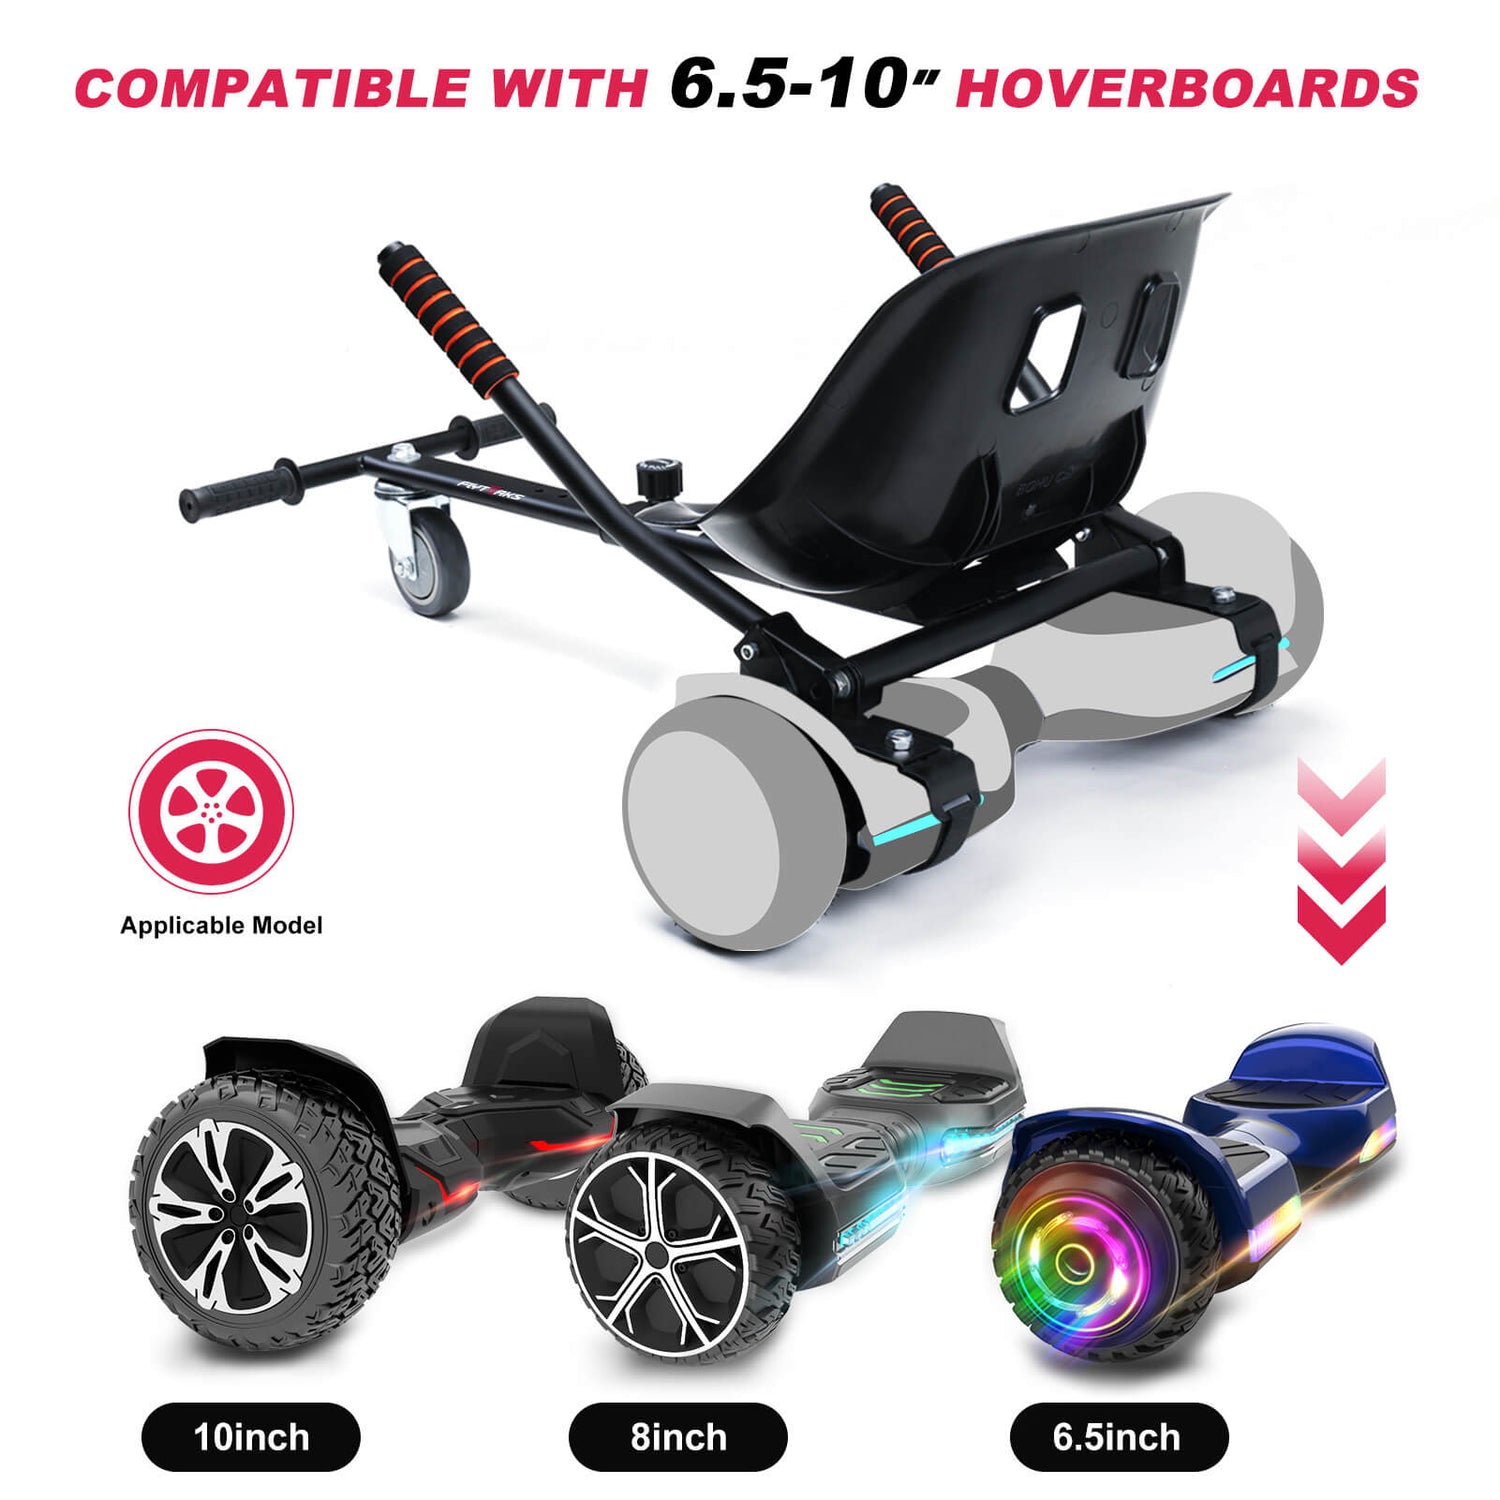 How to attach hoverkart straps to the Hoverkart Hoverboard